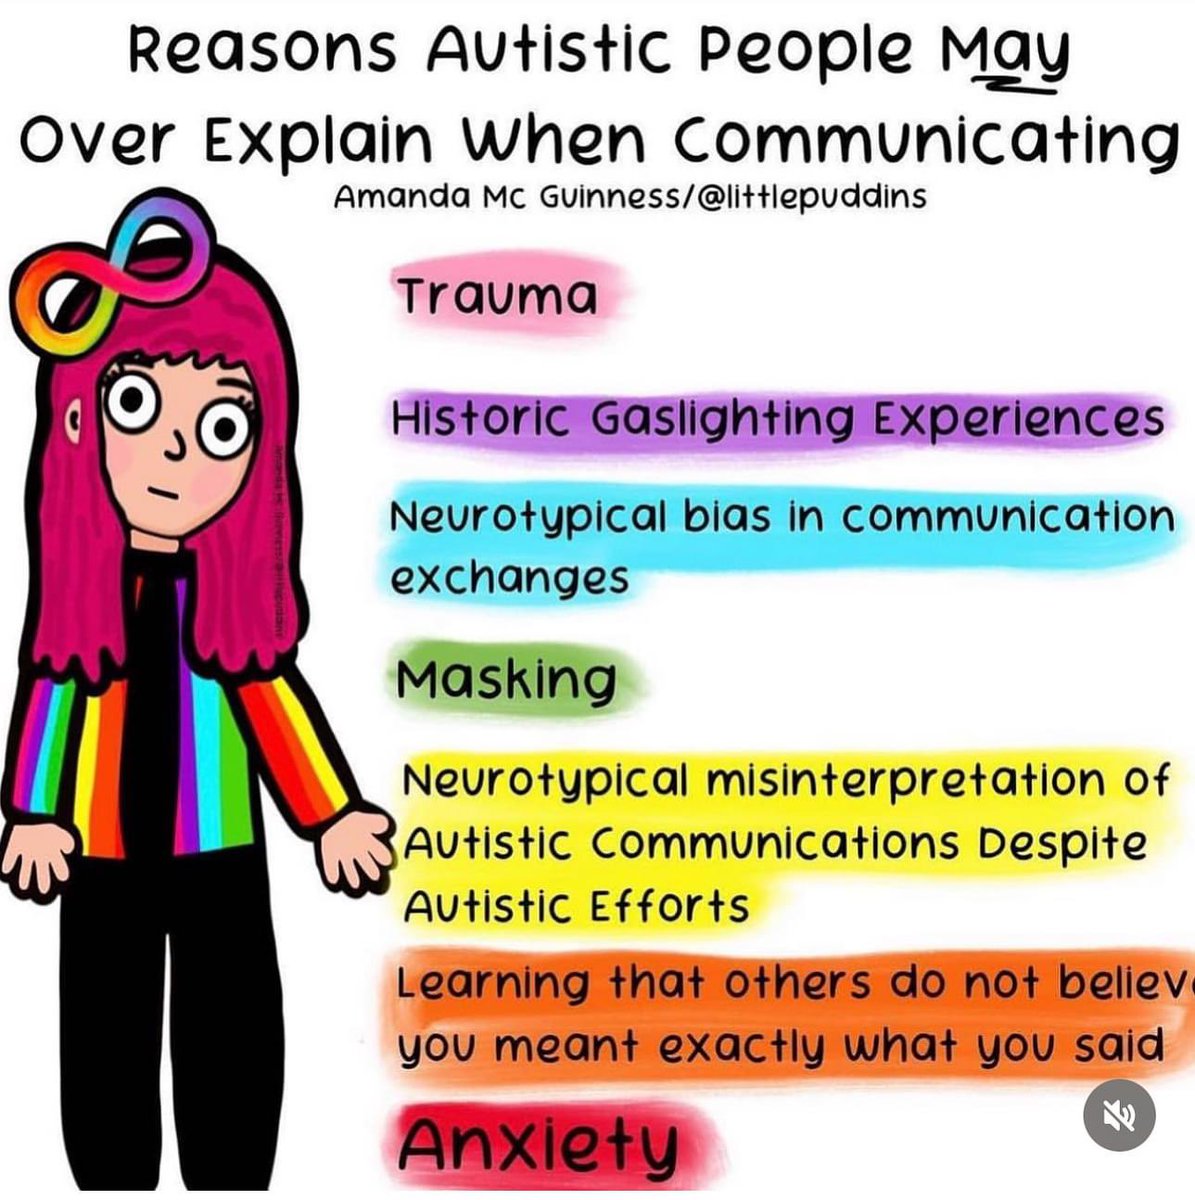 Reasons why autistic people may over explain when communicating

*Trauma 
*Historic gaslighting experiences 
*Neurotypical bias in communication exchanges 
*Masking 
*Anxiety 
Full description in ALT 

~Amanda McGuinness @LittlePudsTweet 
#AutismAcceptance2024